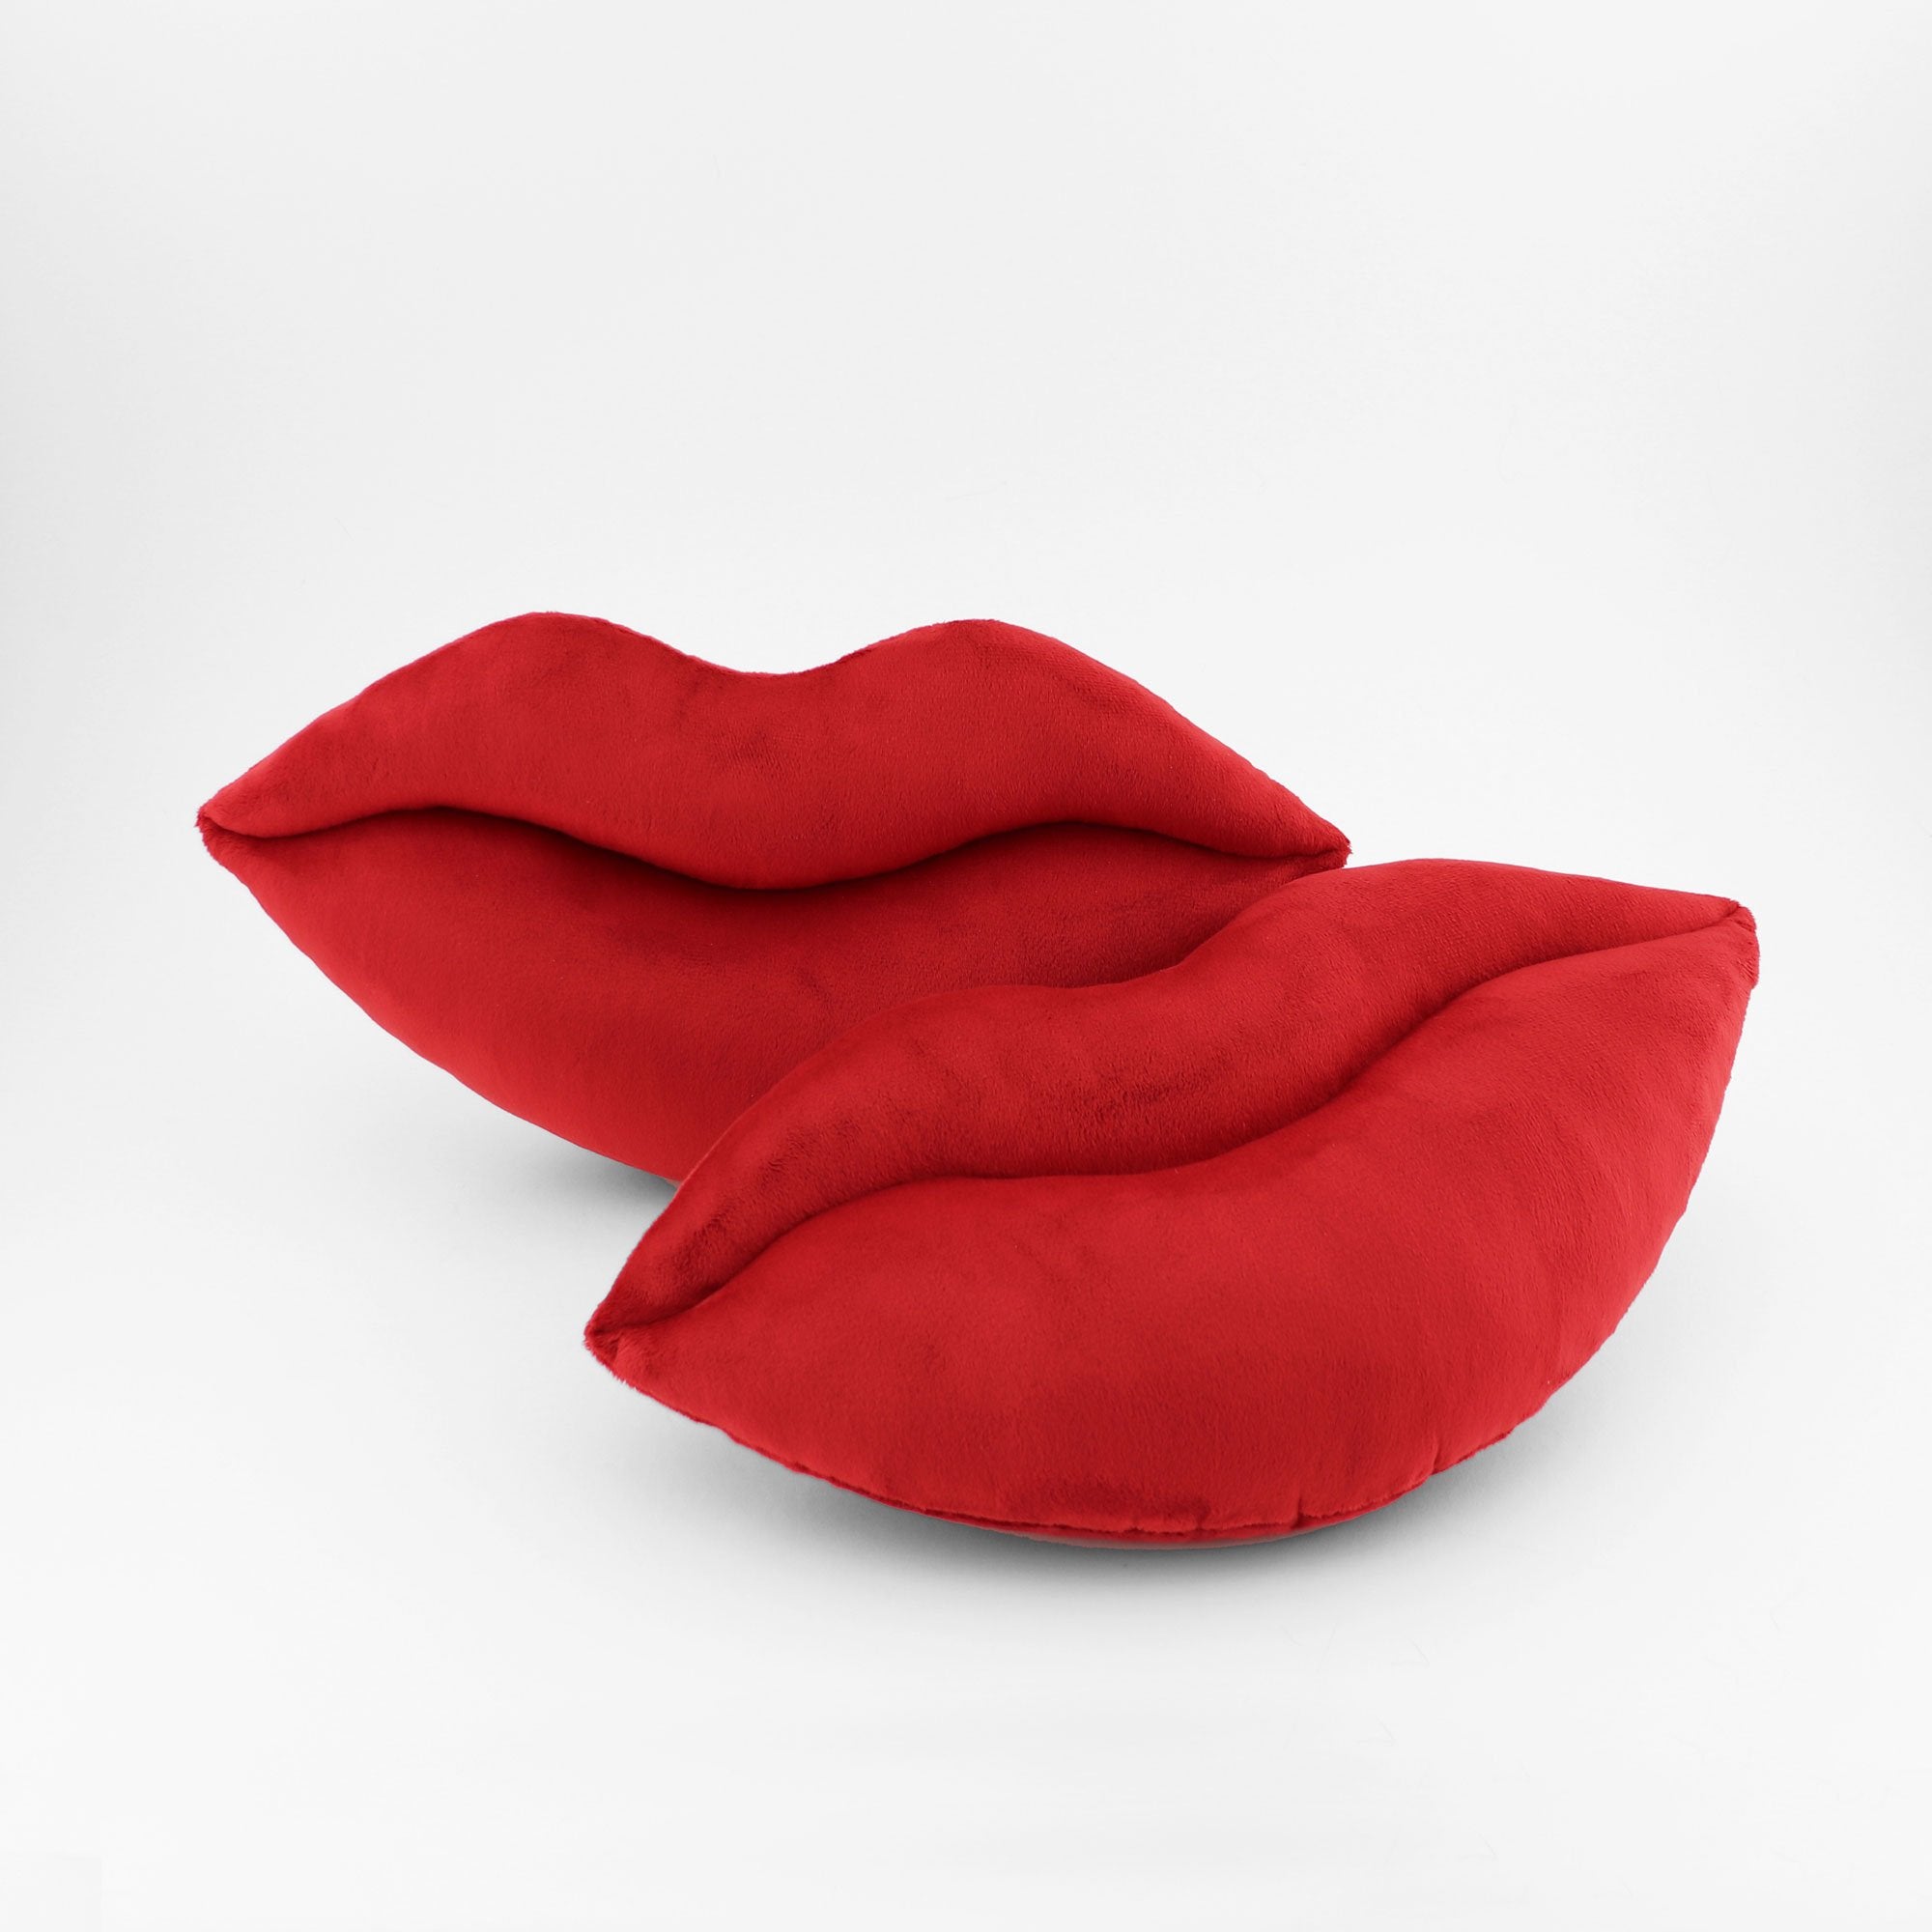 A pair of crimson red lips shaped decorative pillows.